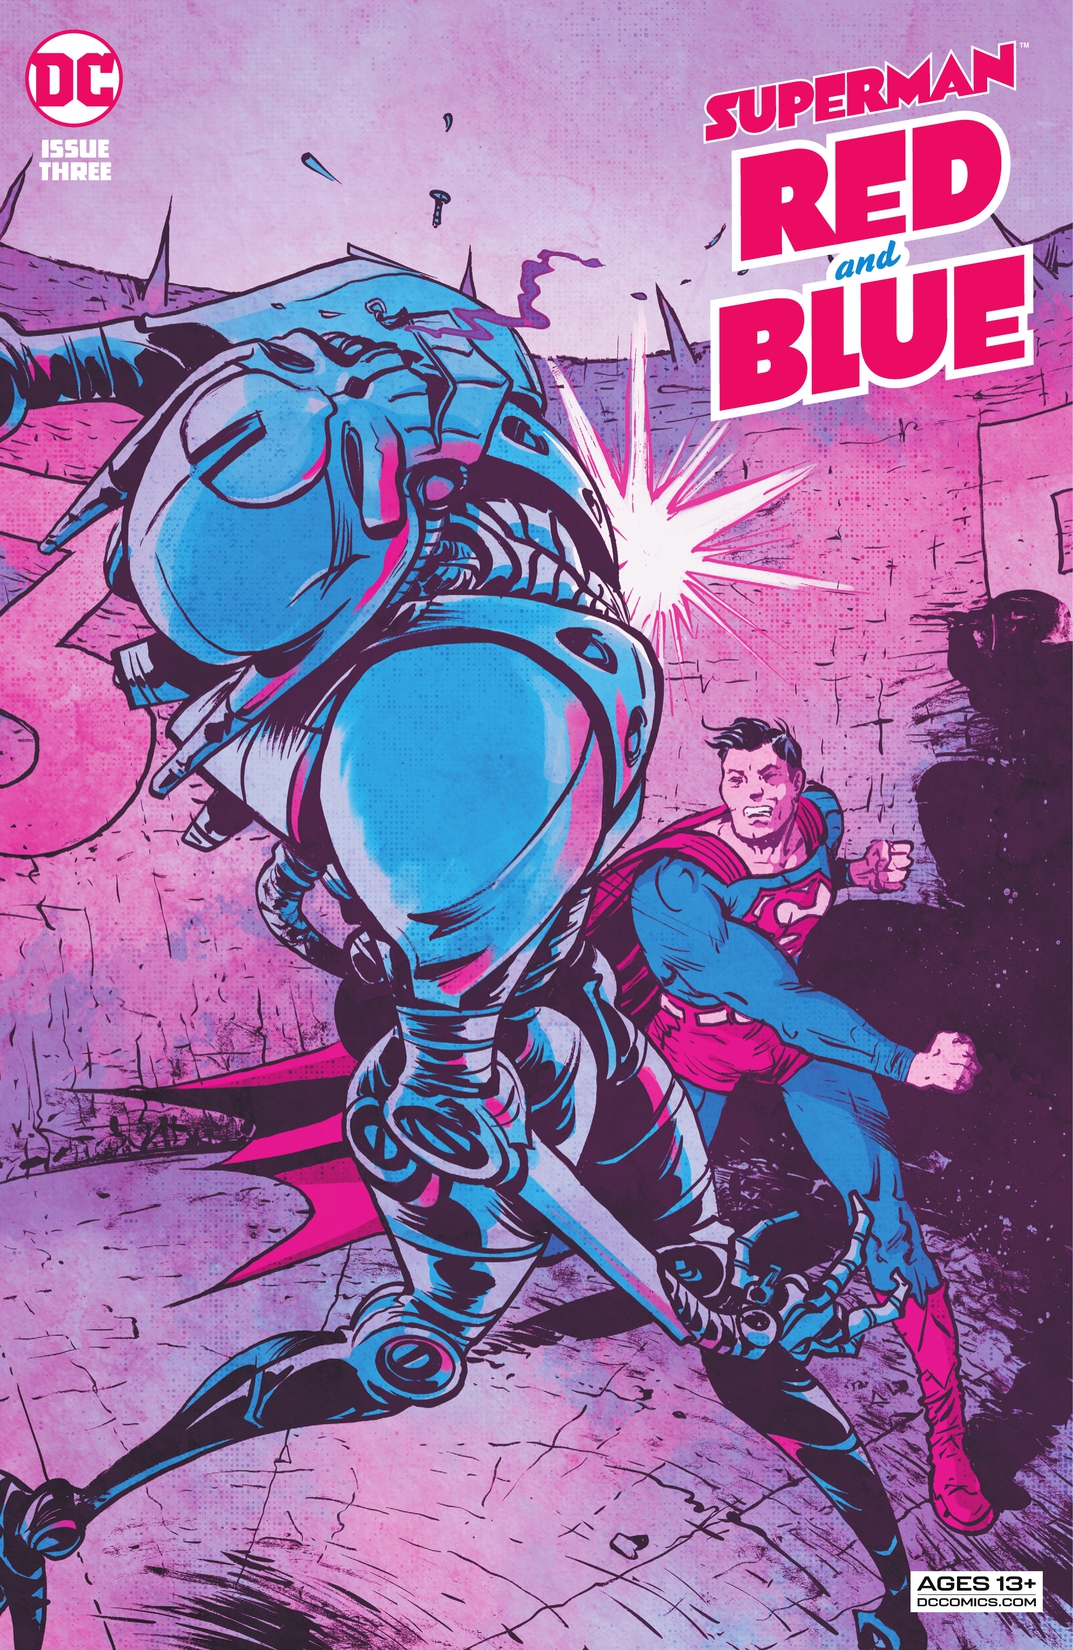 Superman Red & Blue #3 preview images